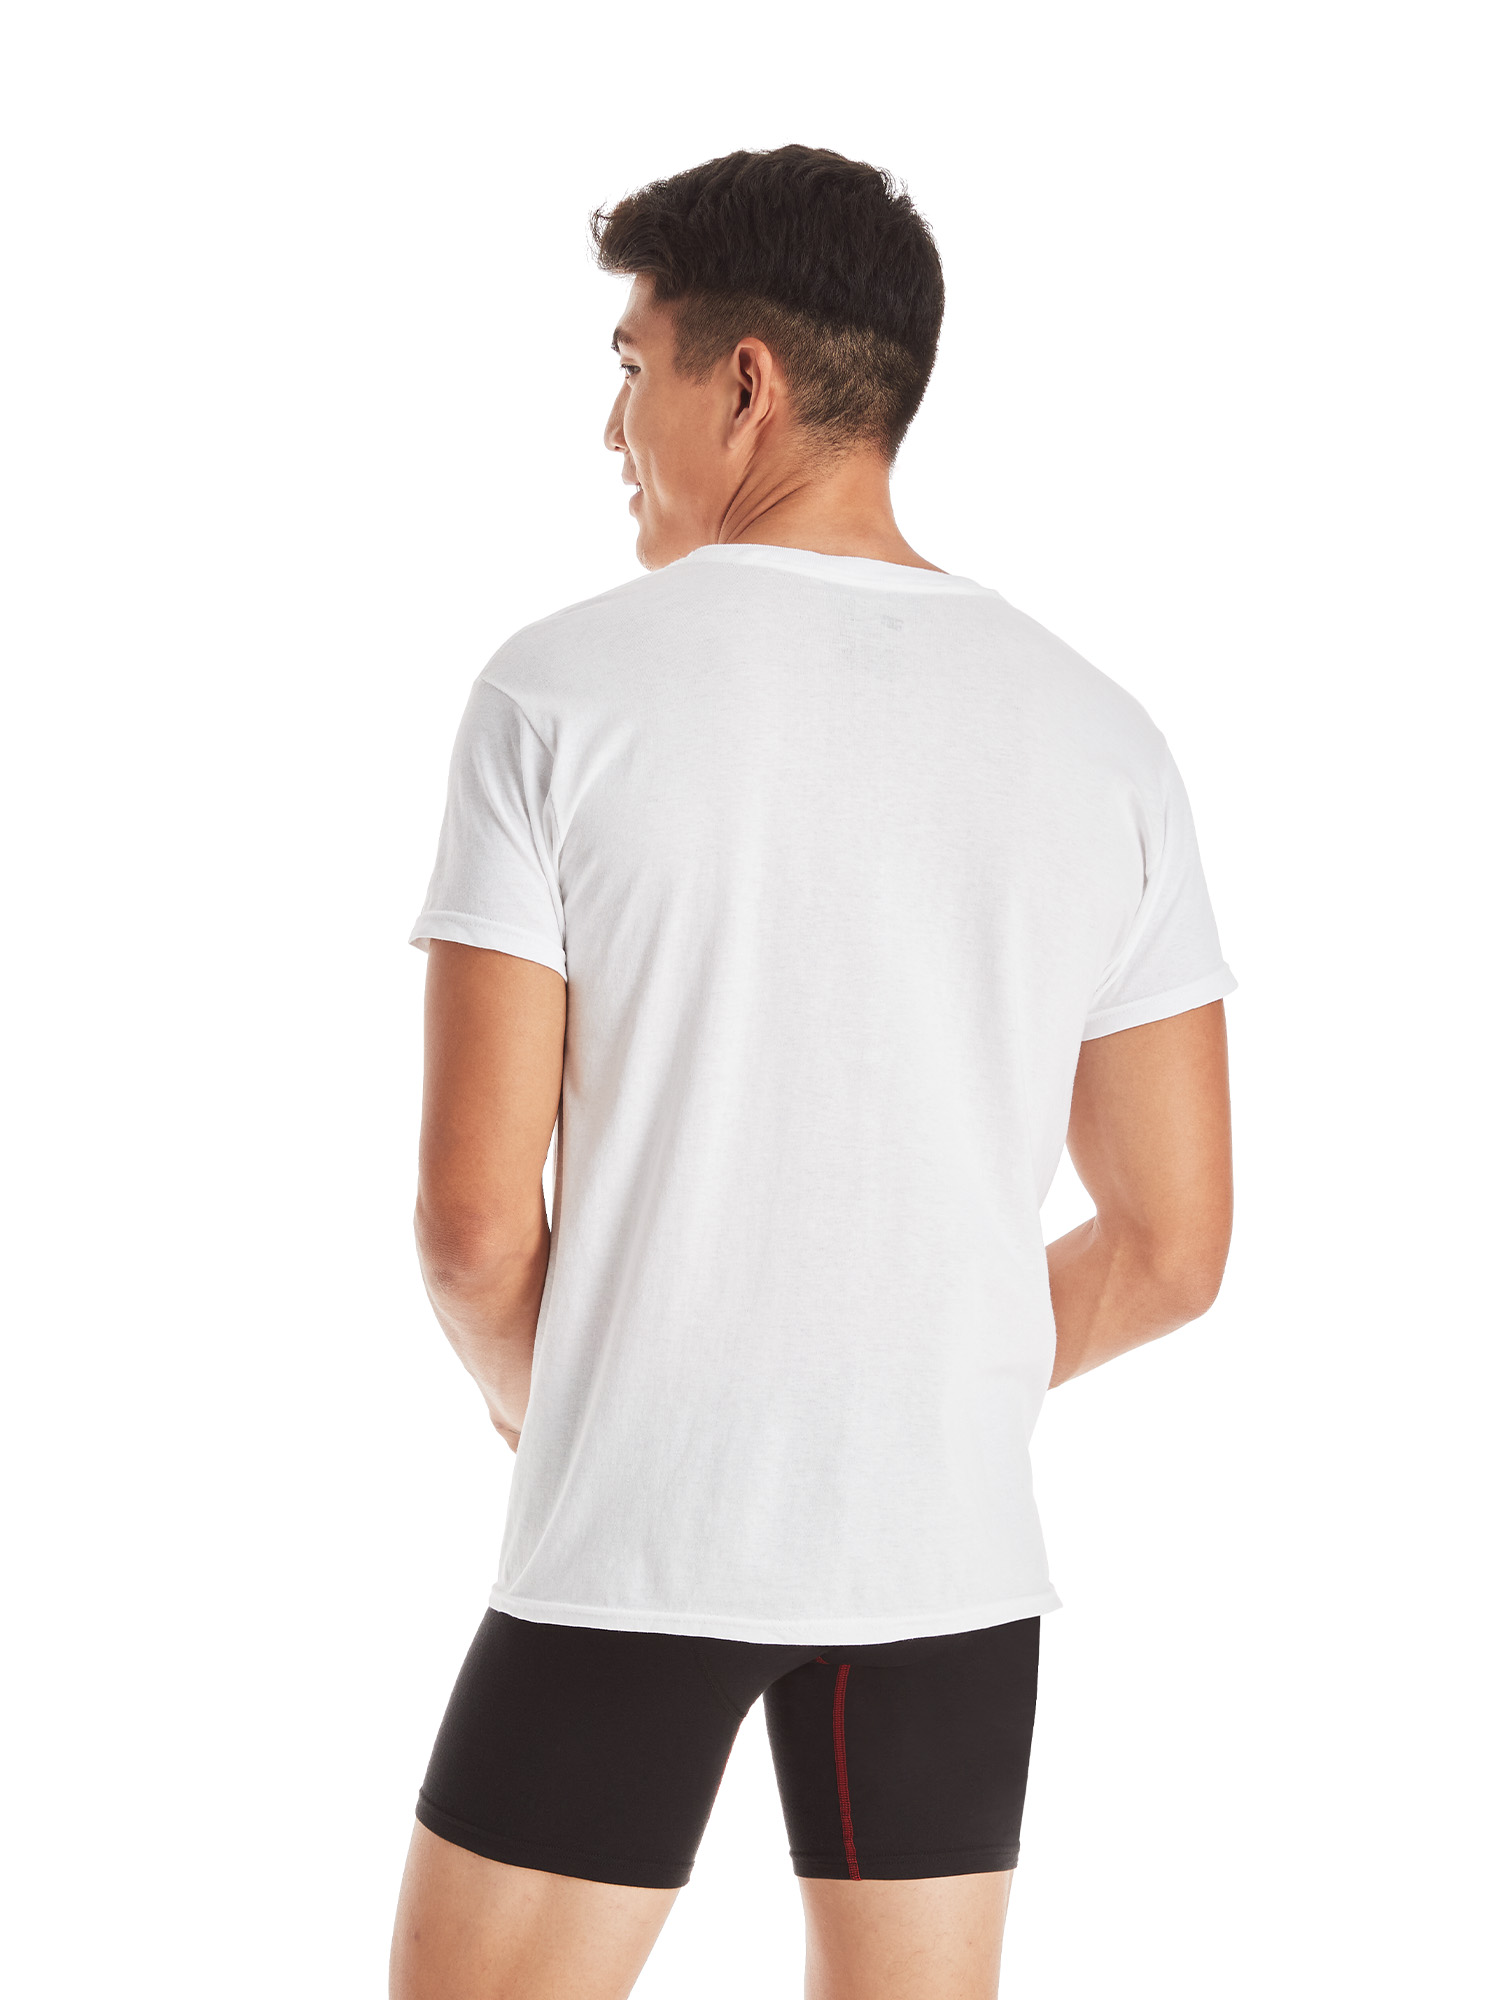 Hanes Men's Value Pack White Crew T-Shirt Undershirts, 6 Pack - image 5 of 10